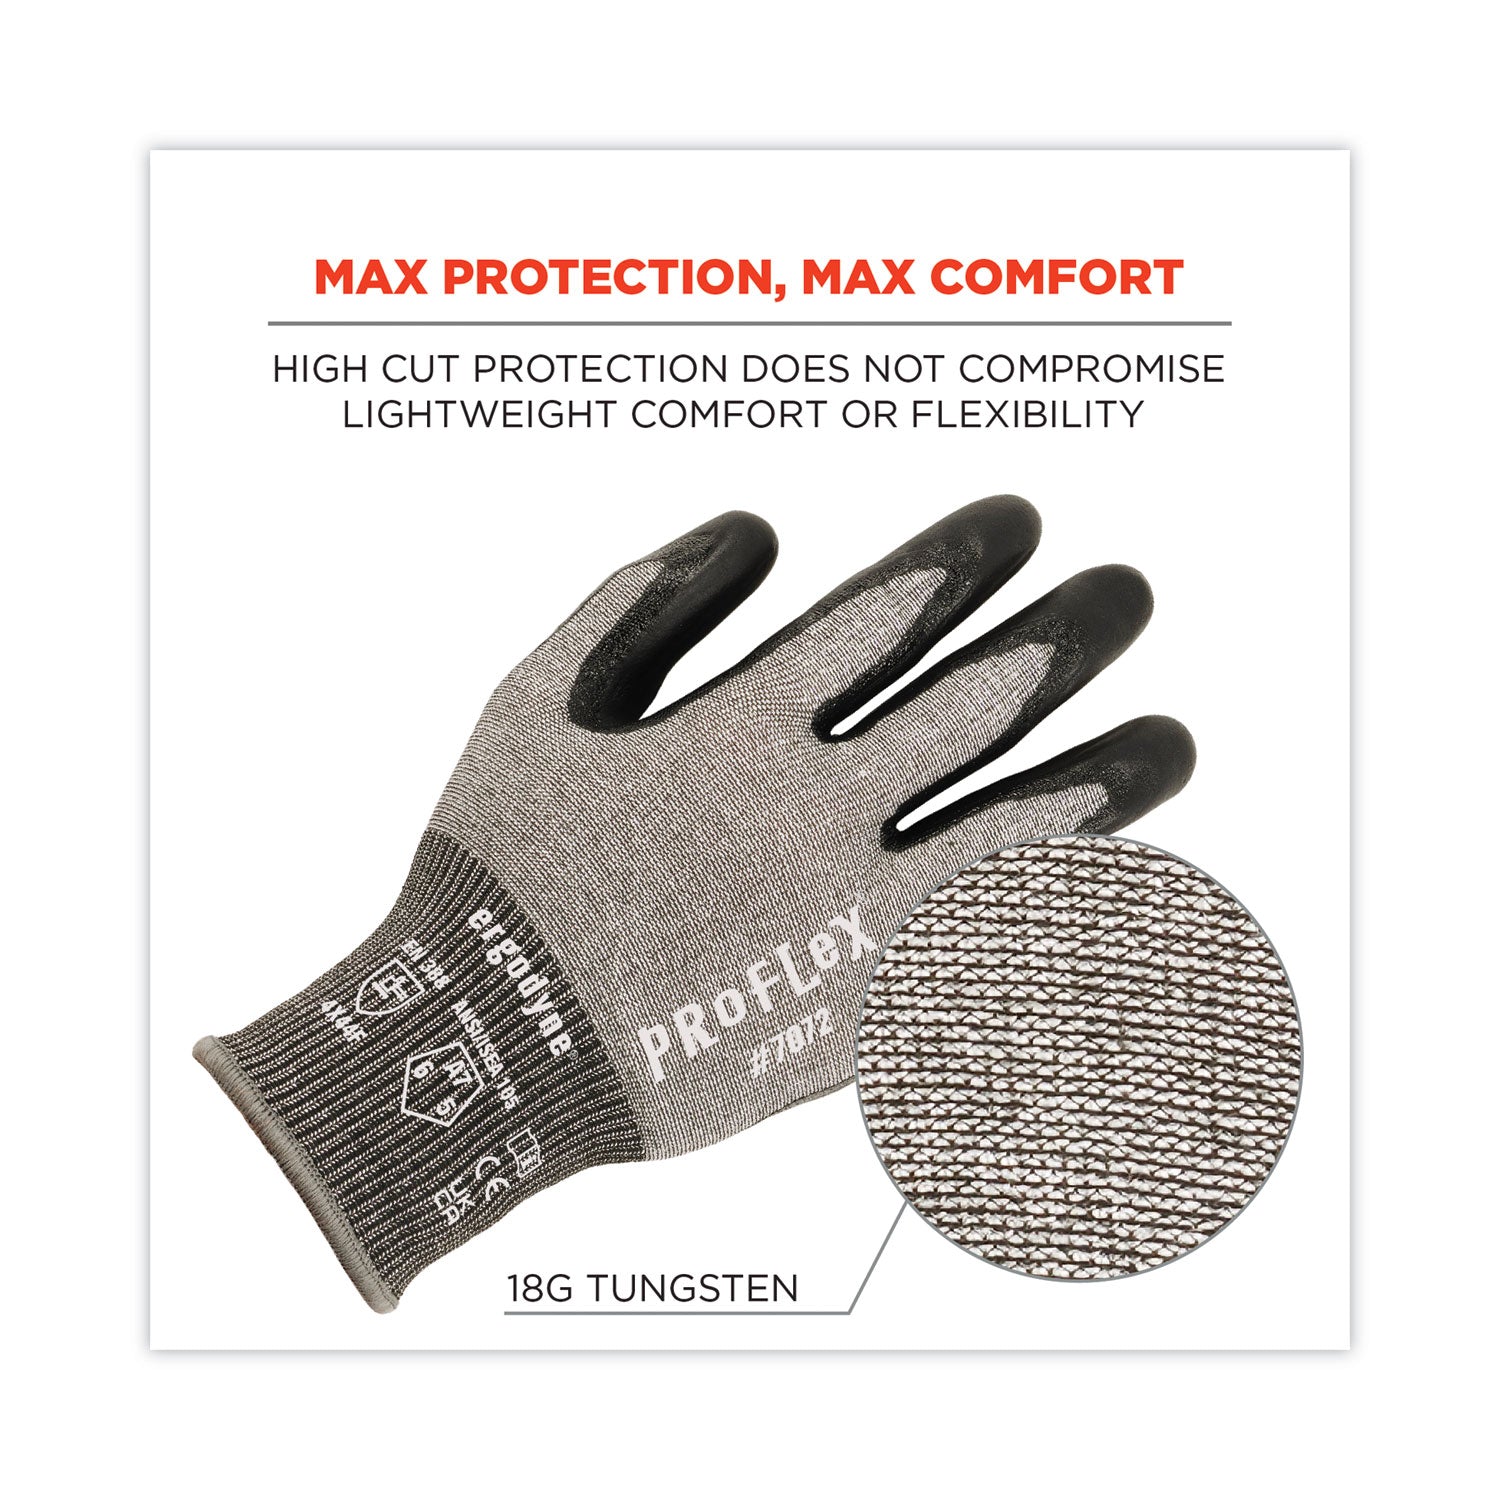 proflex-7072-ansi-a7-nitrile-coated-cr-gloves-gray-x-large-pair-ships-in-1-3-business-days_ego10315 - 5